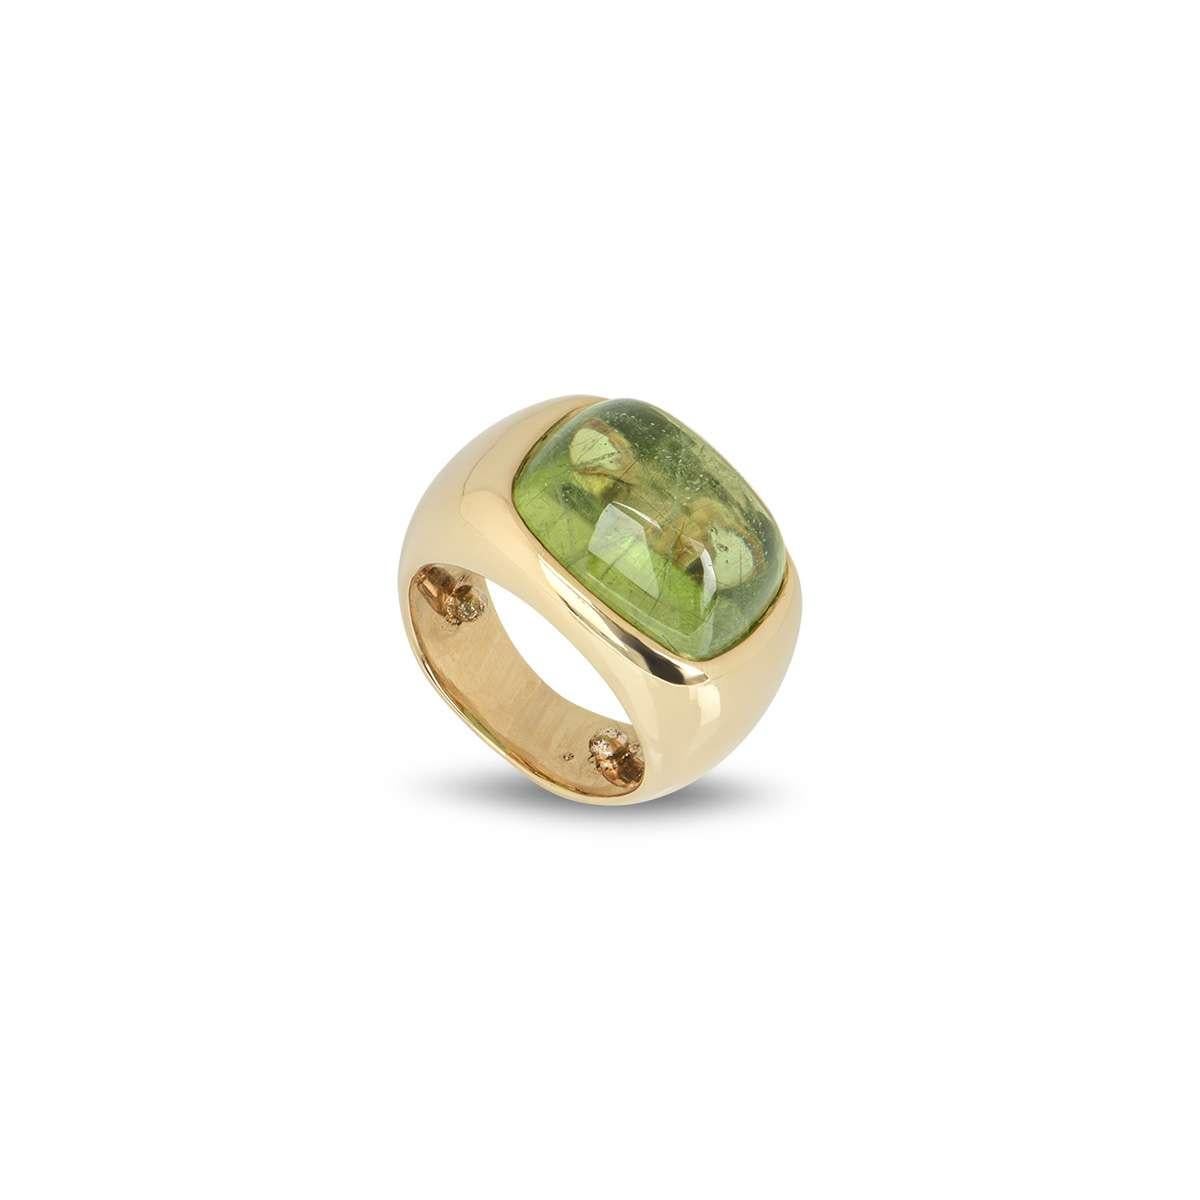 An 18k yellow gold dress ring by Rossi. The ring is set to the centre with a cushion shaped cabochon peridot, measuring approximately 12mm x 16mm. The ring is a size UK L - EU 51 - US 5.5 but can be adjusted for a perfect fit and has a gross weight